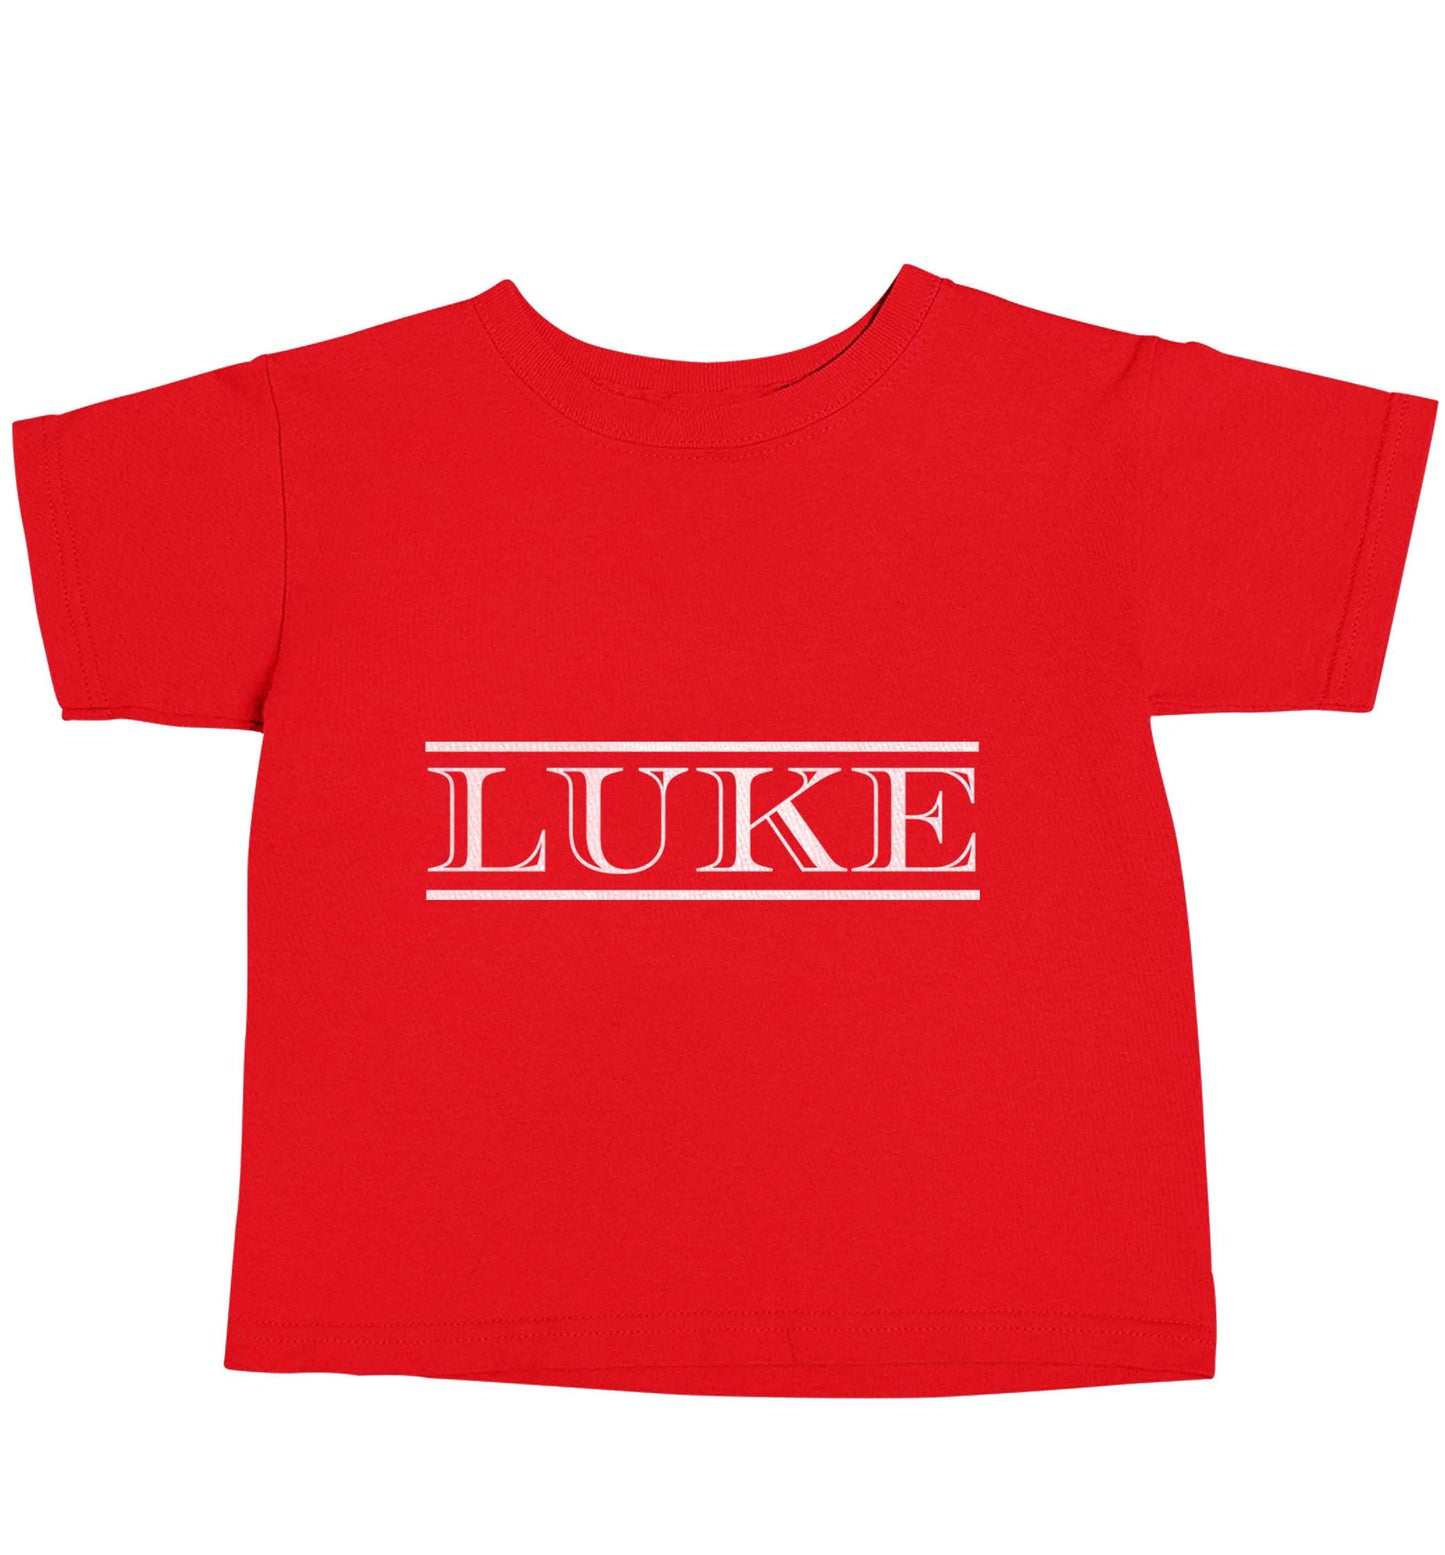 Personalised name red baby toddler Tshirt 2 Years